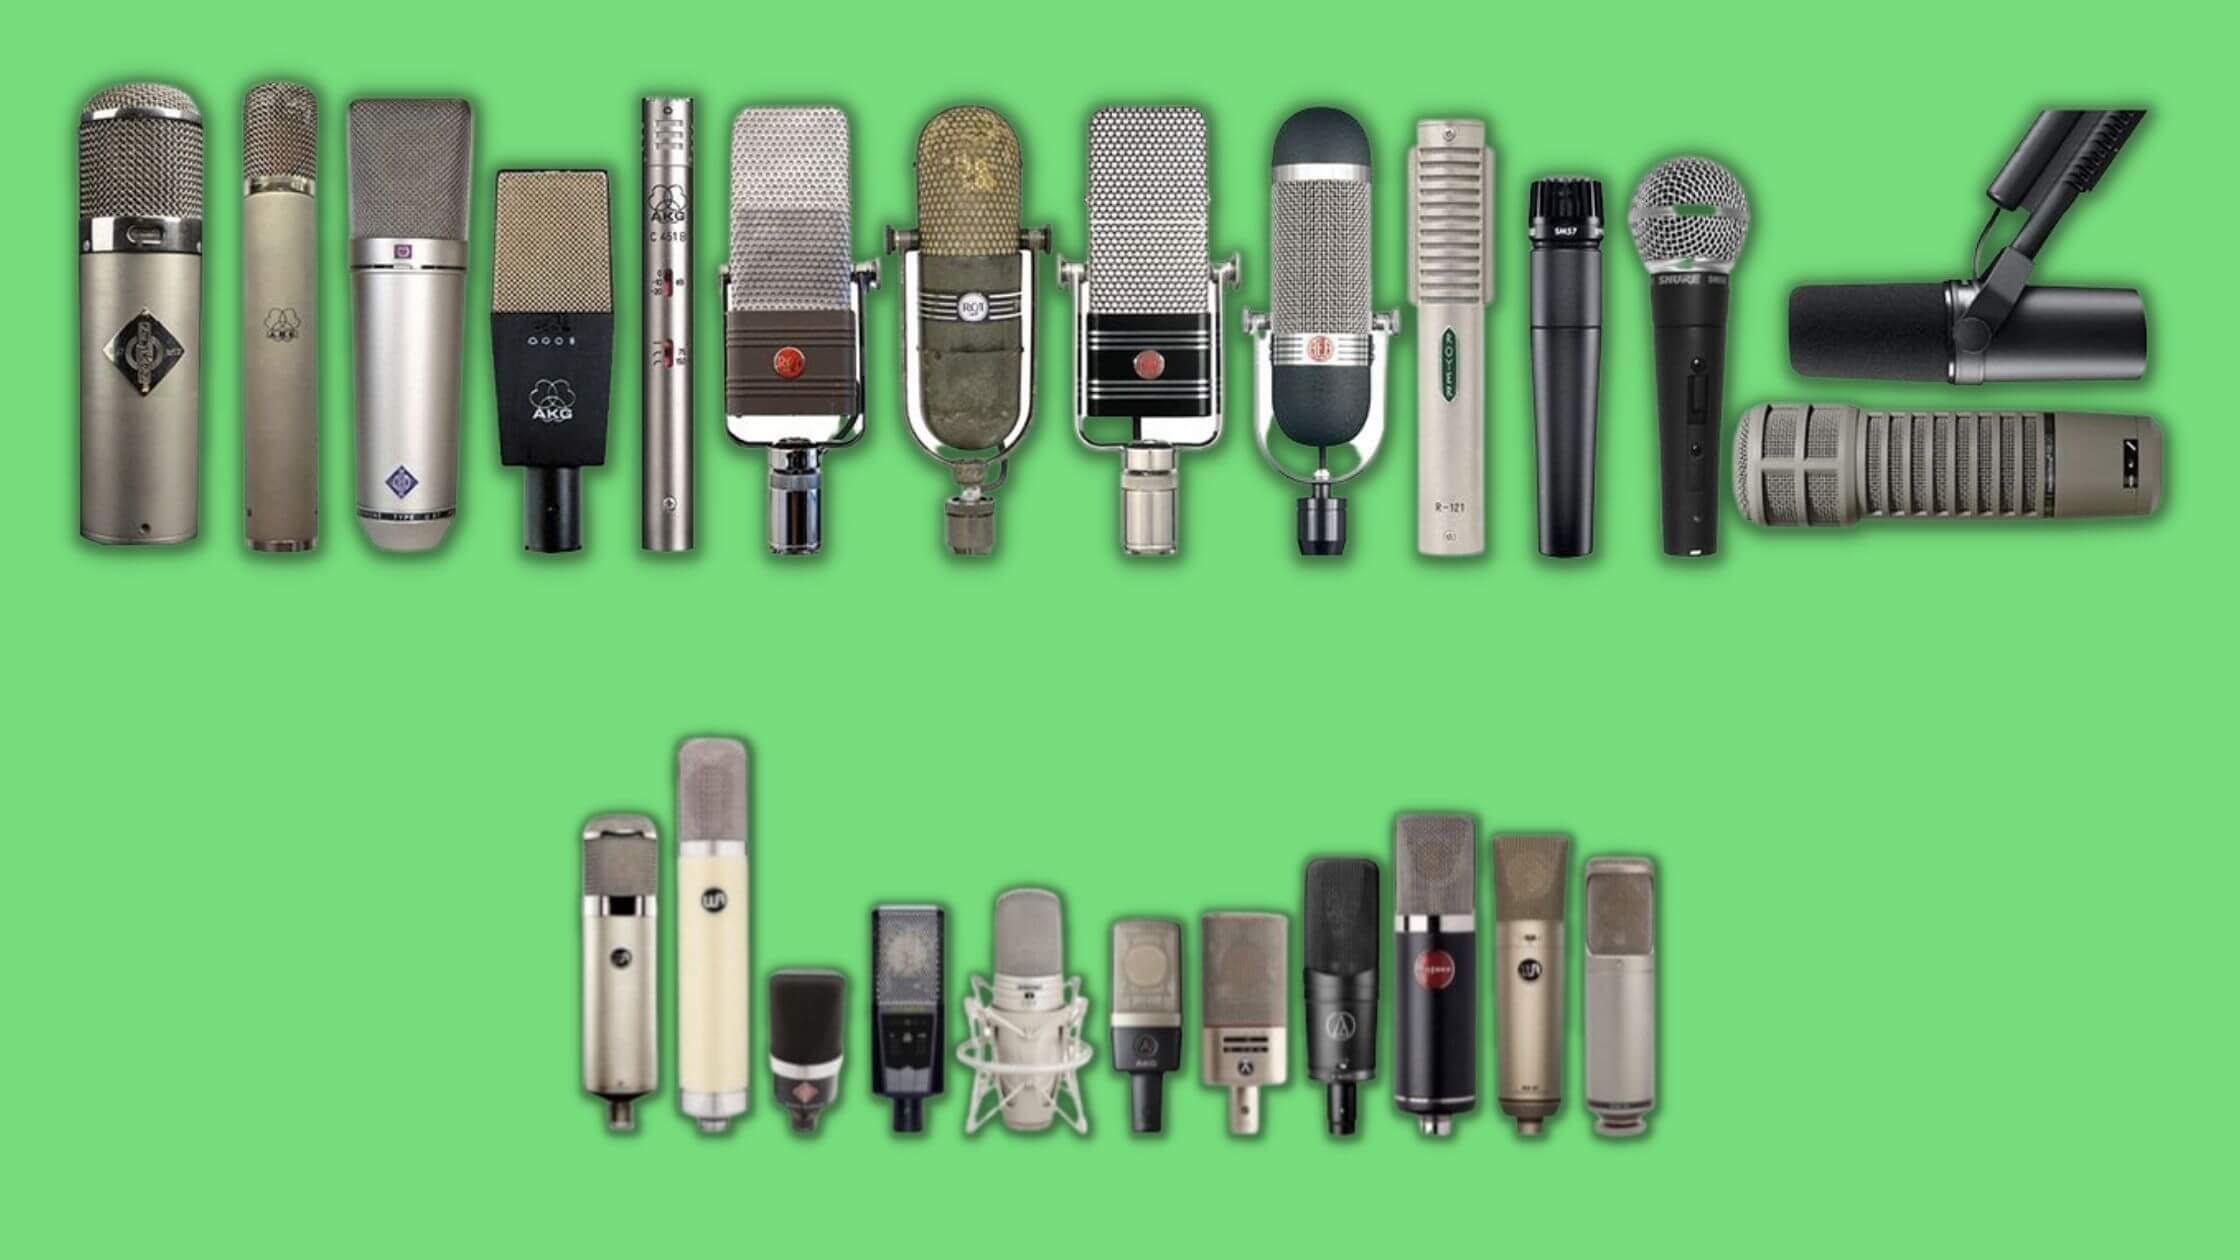 Header image for article: What Are The Different Types of Microphones? How Do They Work? - RouteNote Blog